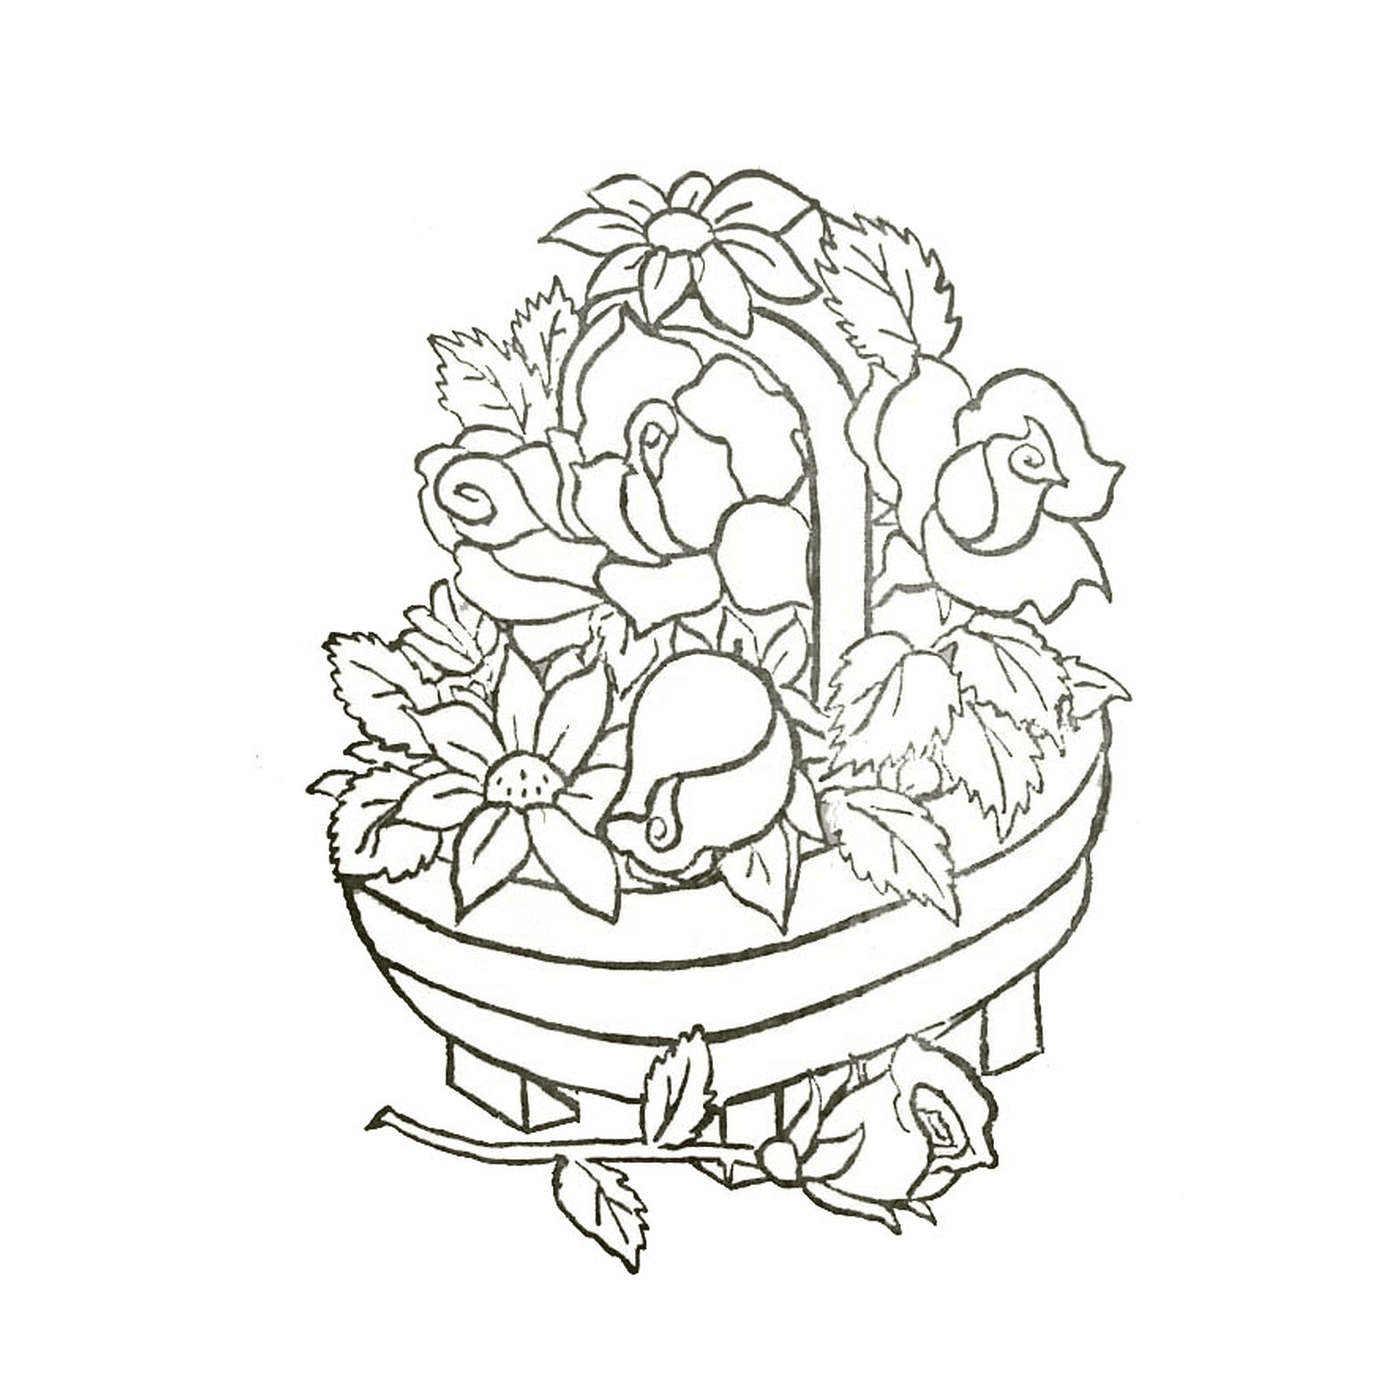  A basket full of flowers 